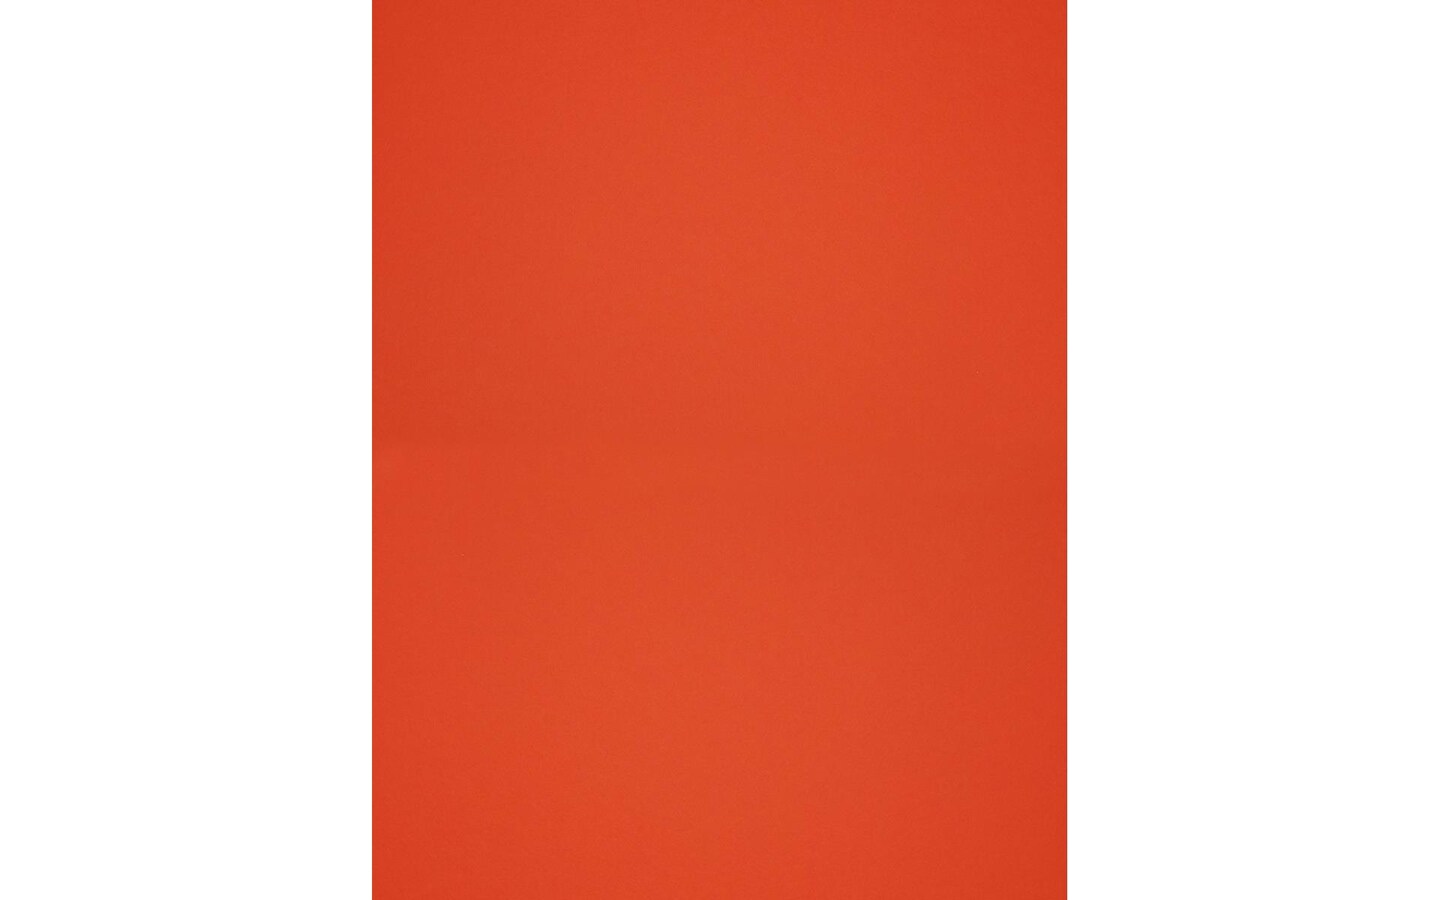 PA Paper Accents Smooth Cardstock 8.5 x 11 Construction Orange